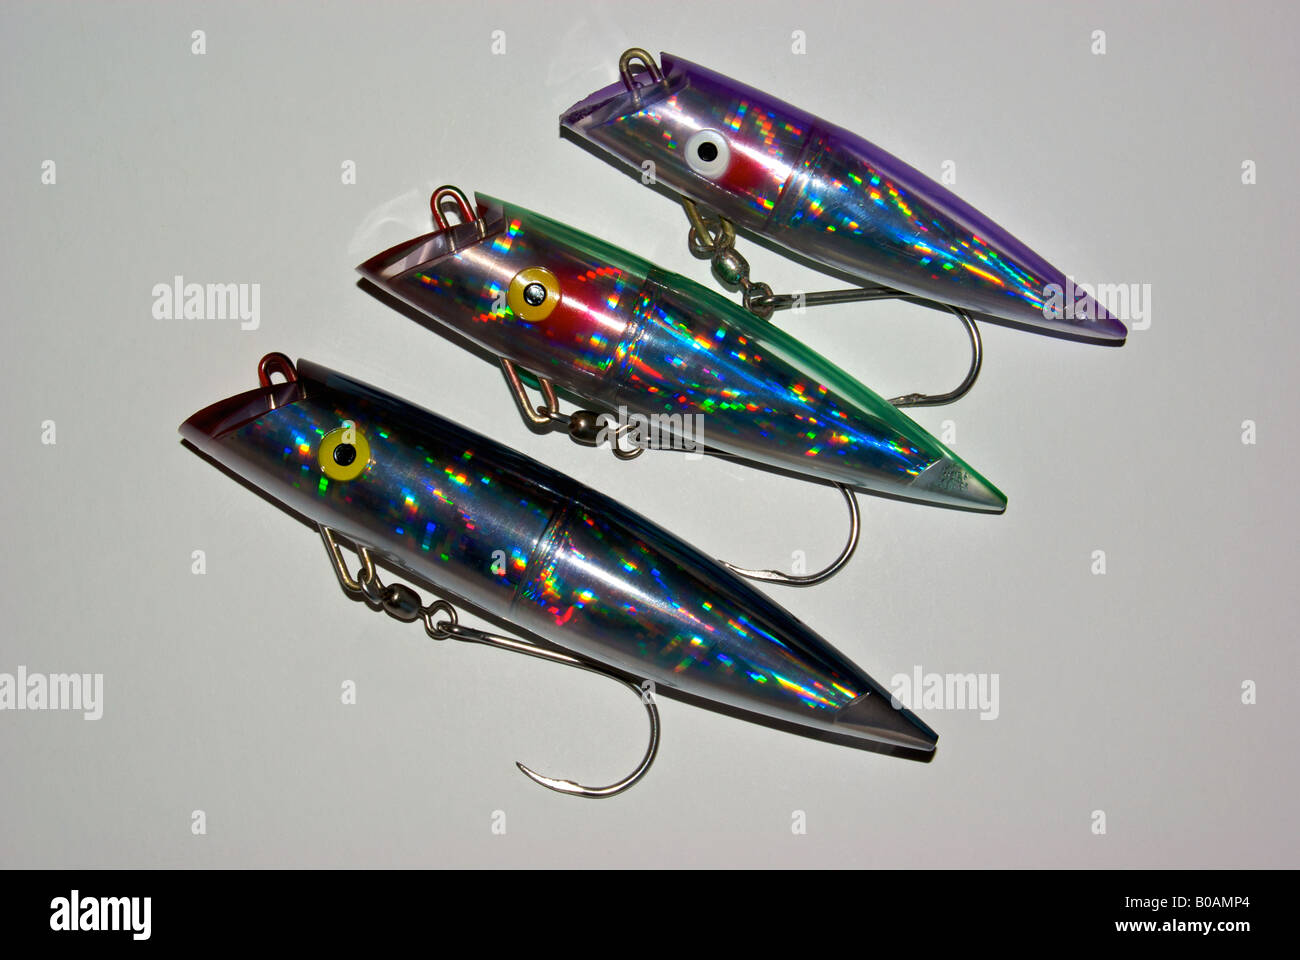 Large Tomic Plaid Series trolling plug fishing lure will attract salmon and  bottom fish Stock Photo - Alamy